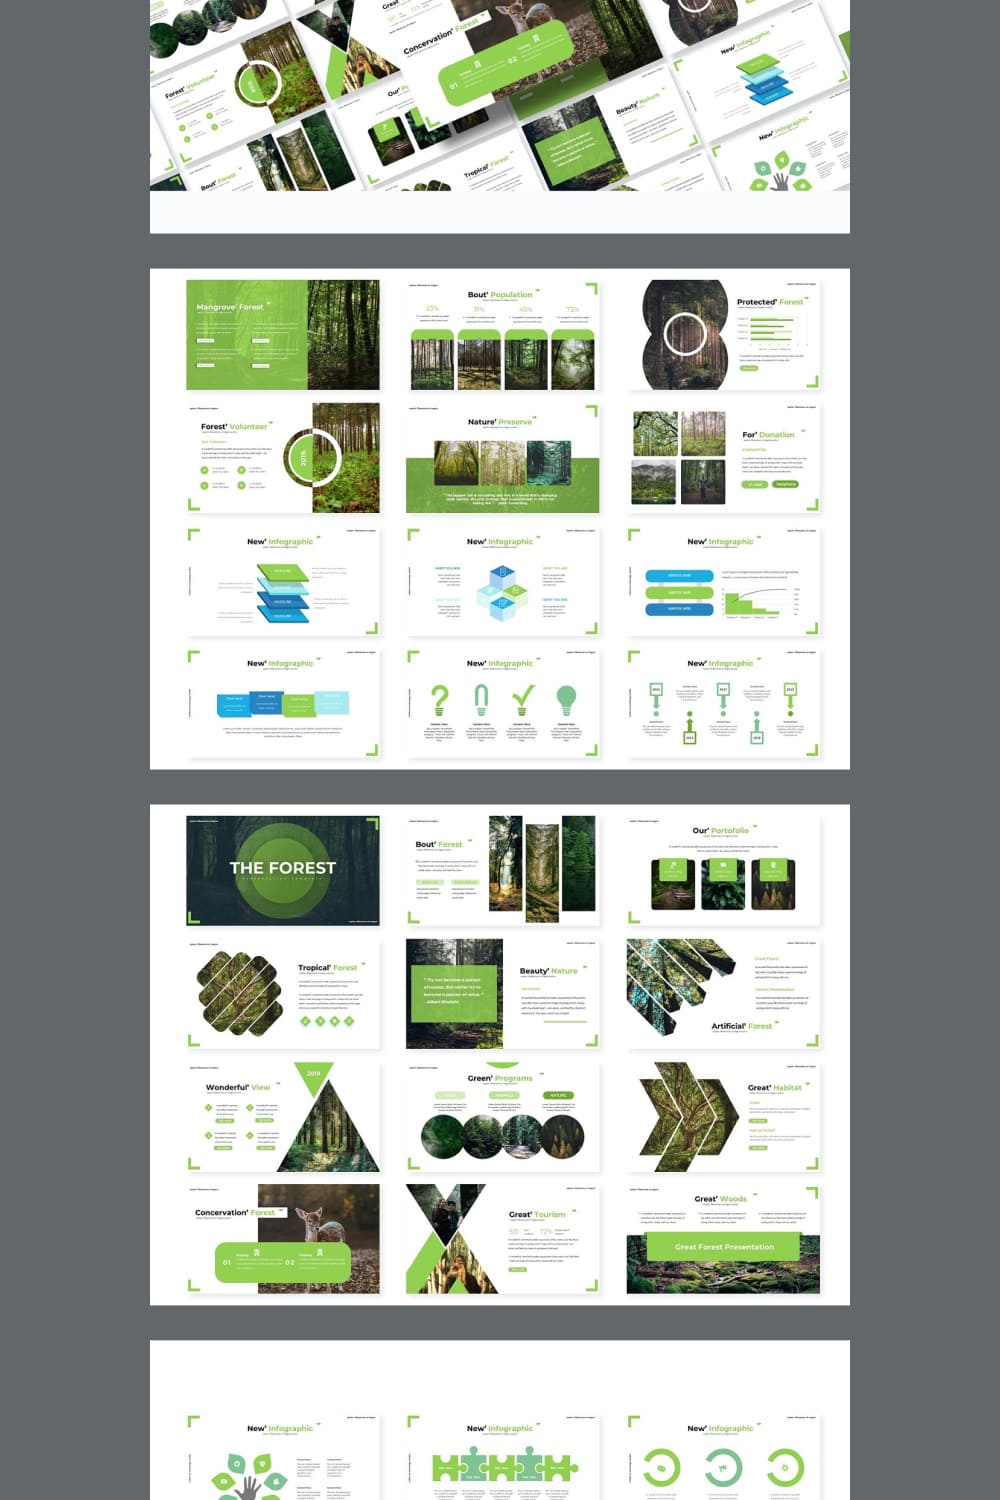 Forest - Keynote Template.